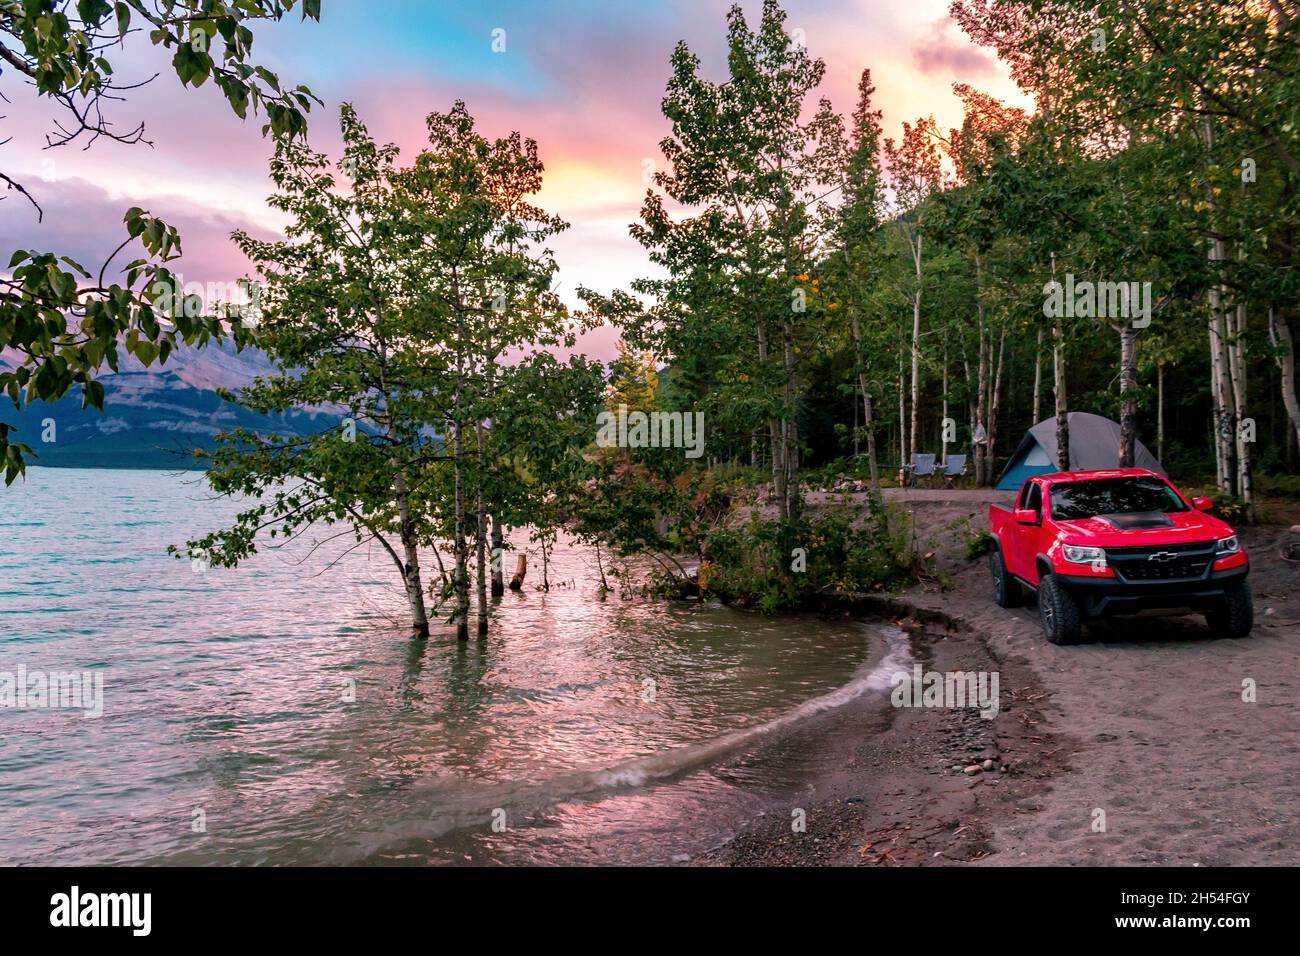 The Perfect camping spot on Abraham Lake with trees, tent and truck infront of sunset lit sky with mountains in background Stock Photo